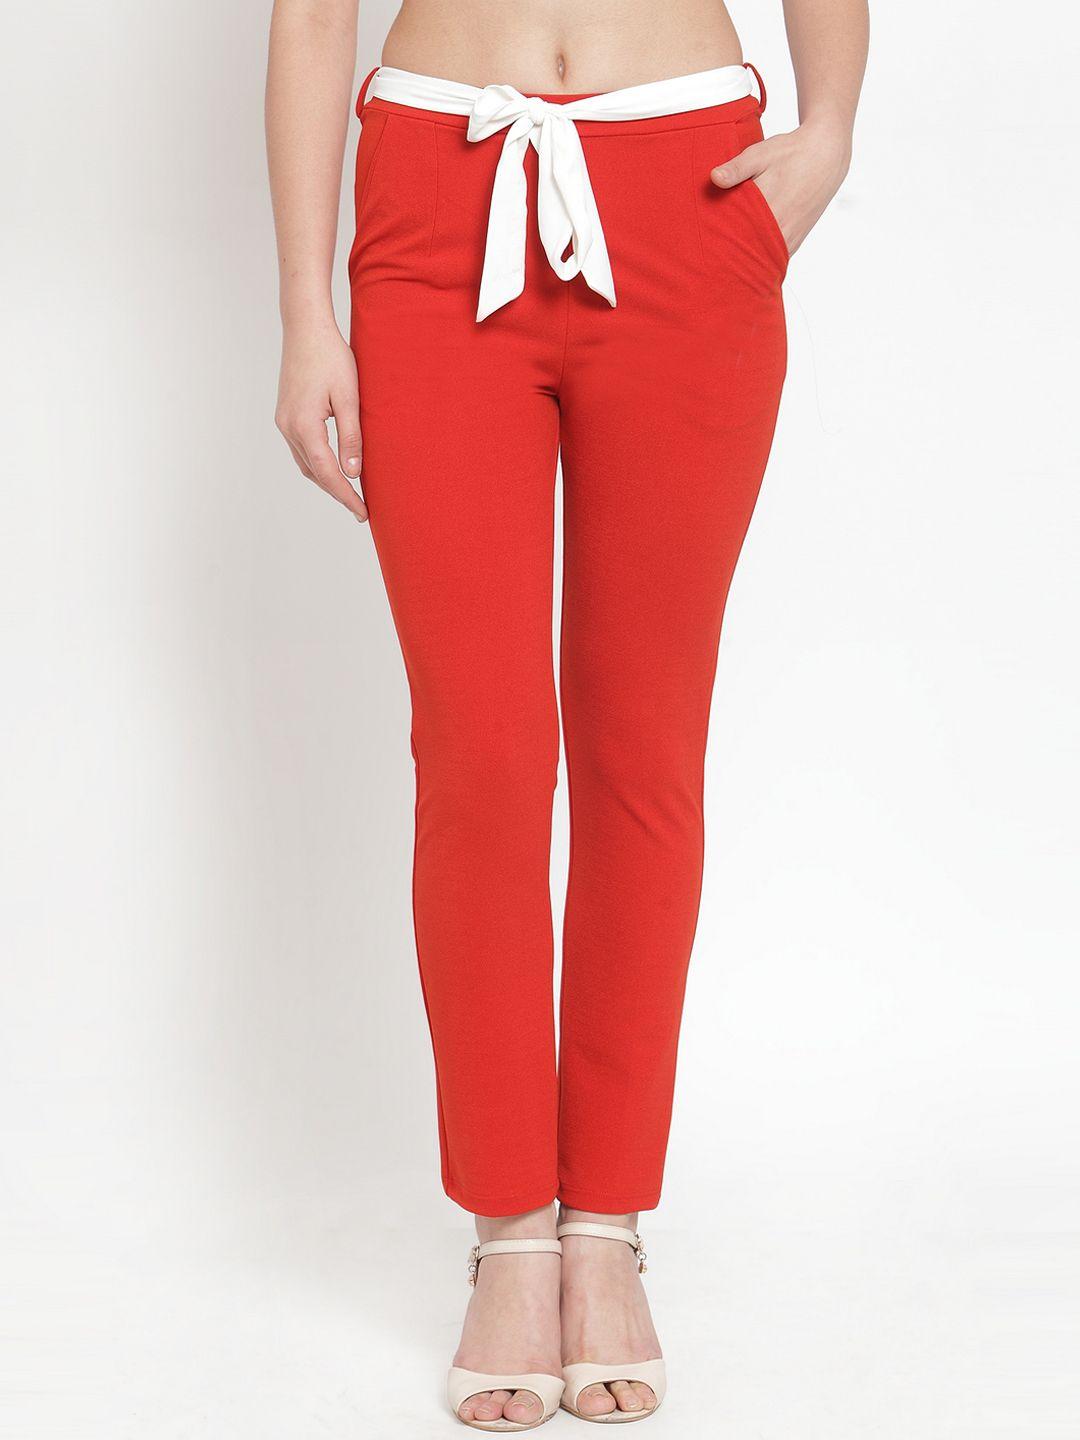 kassually women rust red slim fit solid peg trousers